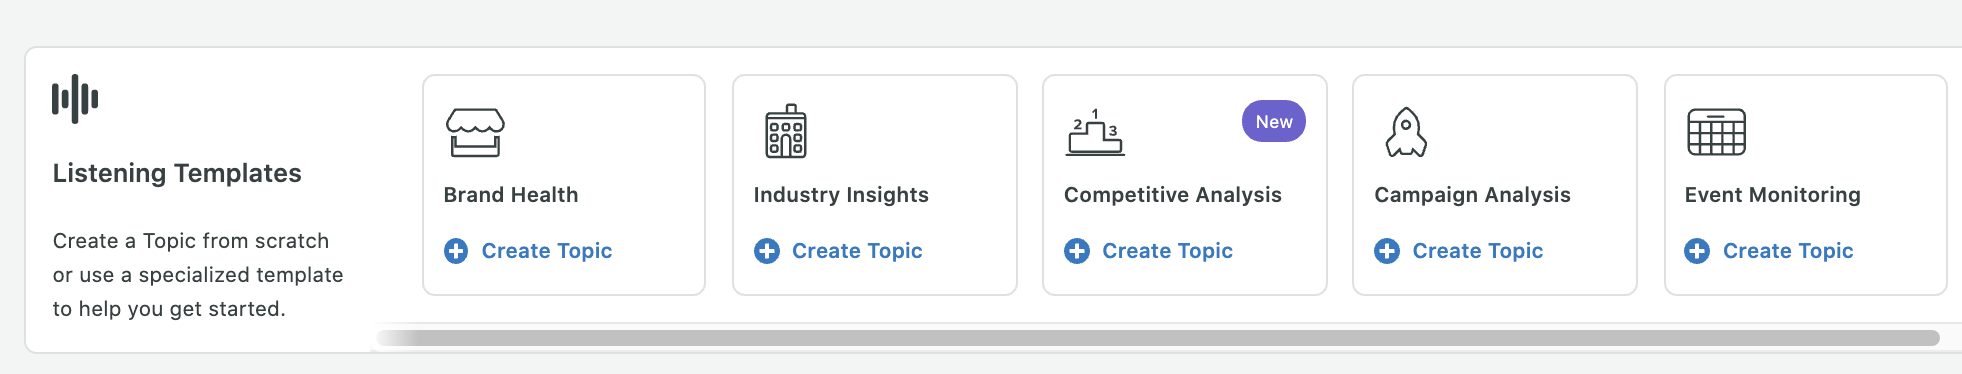 A screenshot of Sprout Social's listening topic templates, which include brand health, industry insights, competitive analysis, campaign analysis and event monitoring.